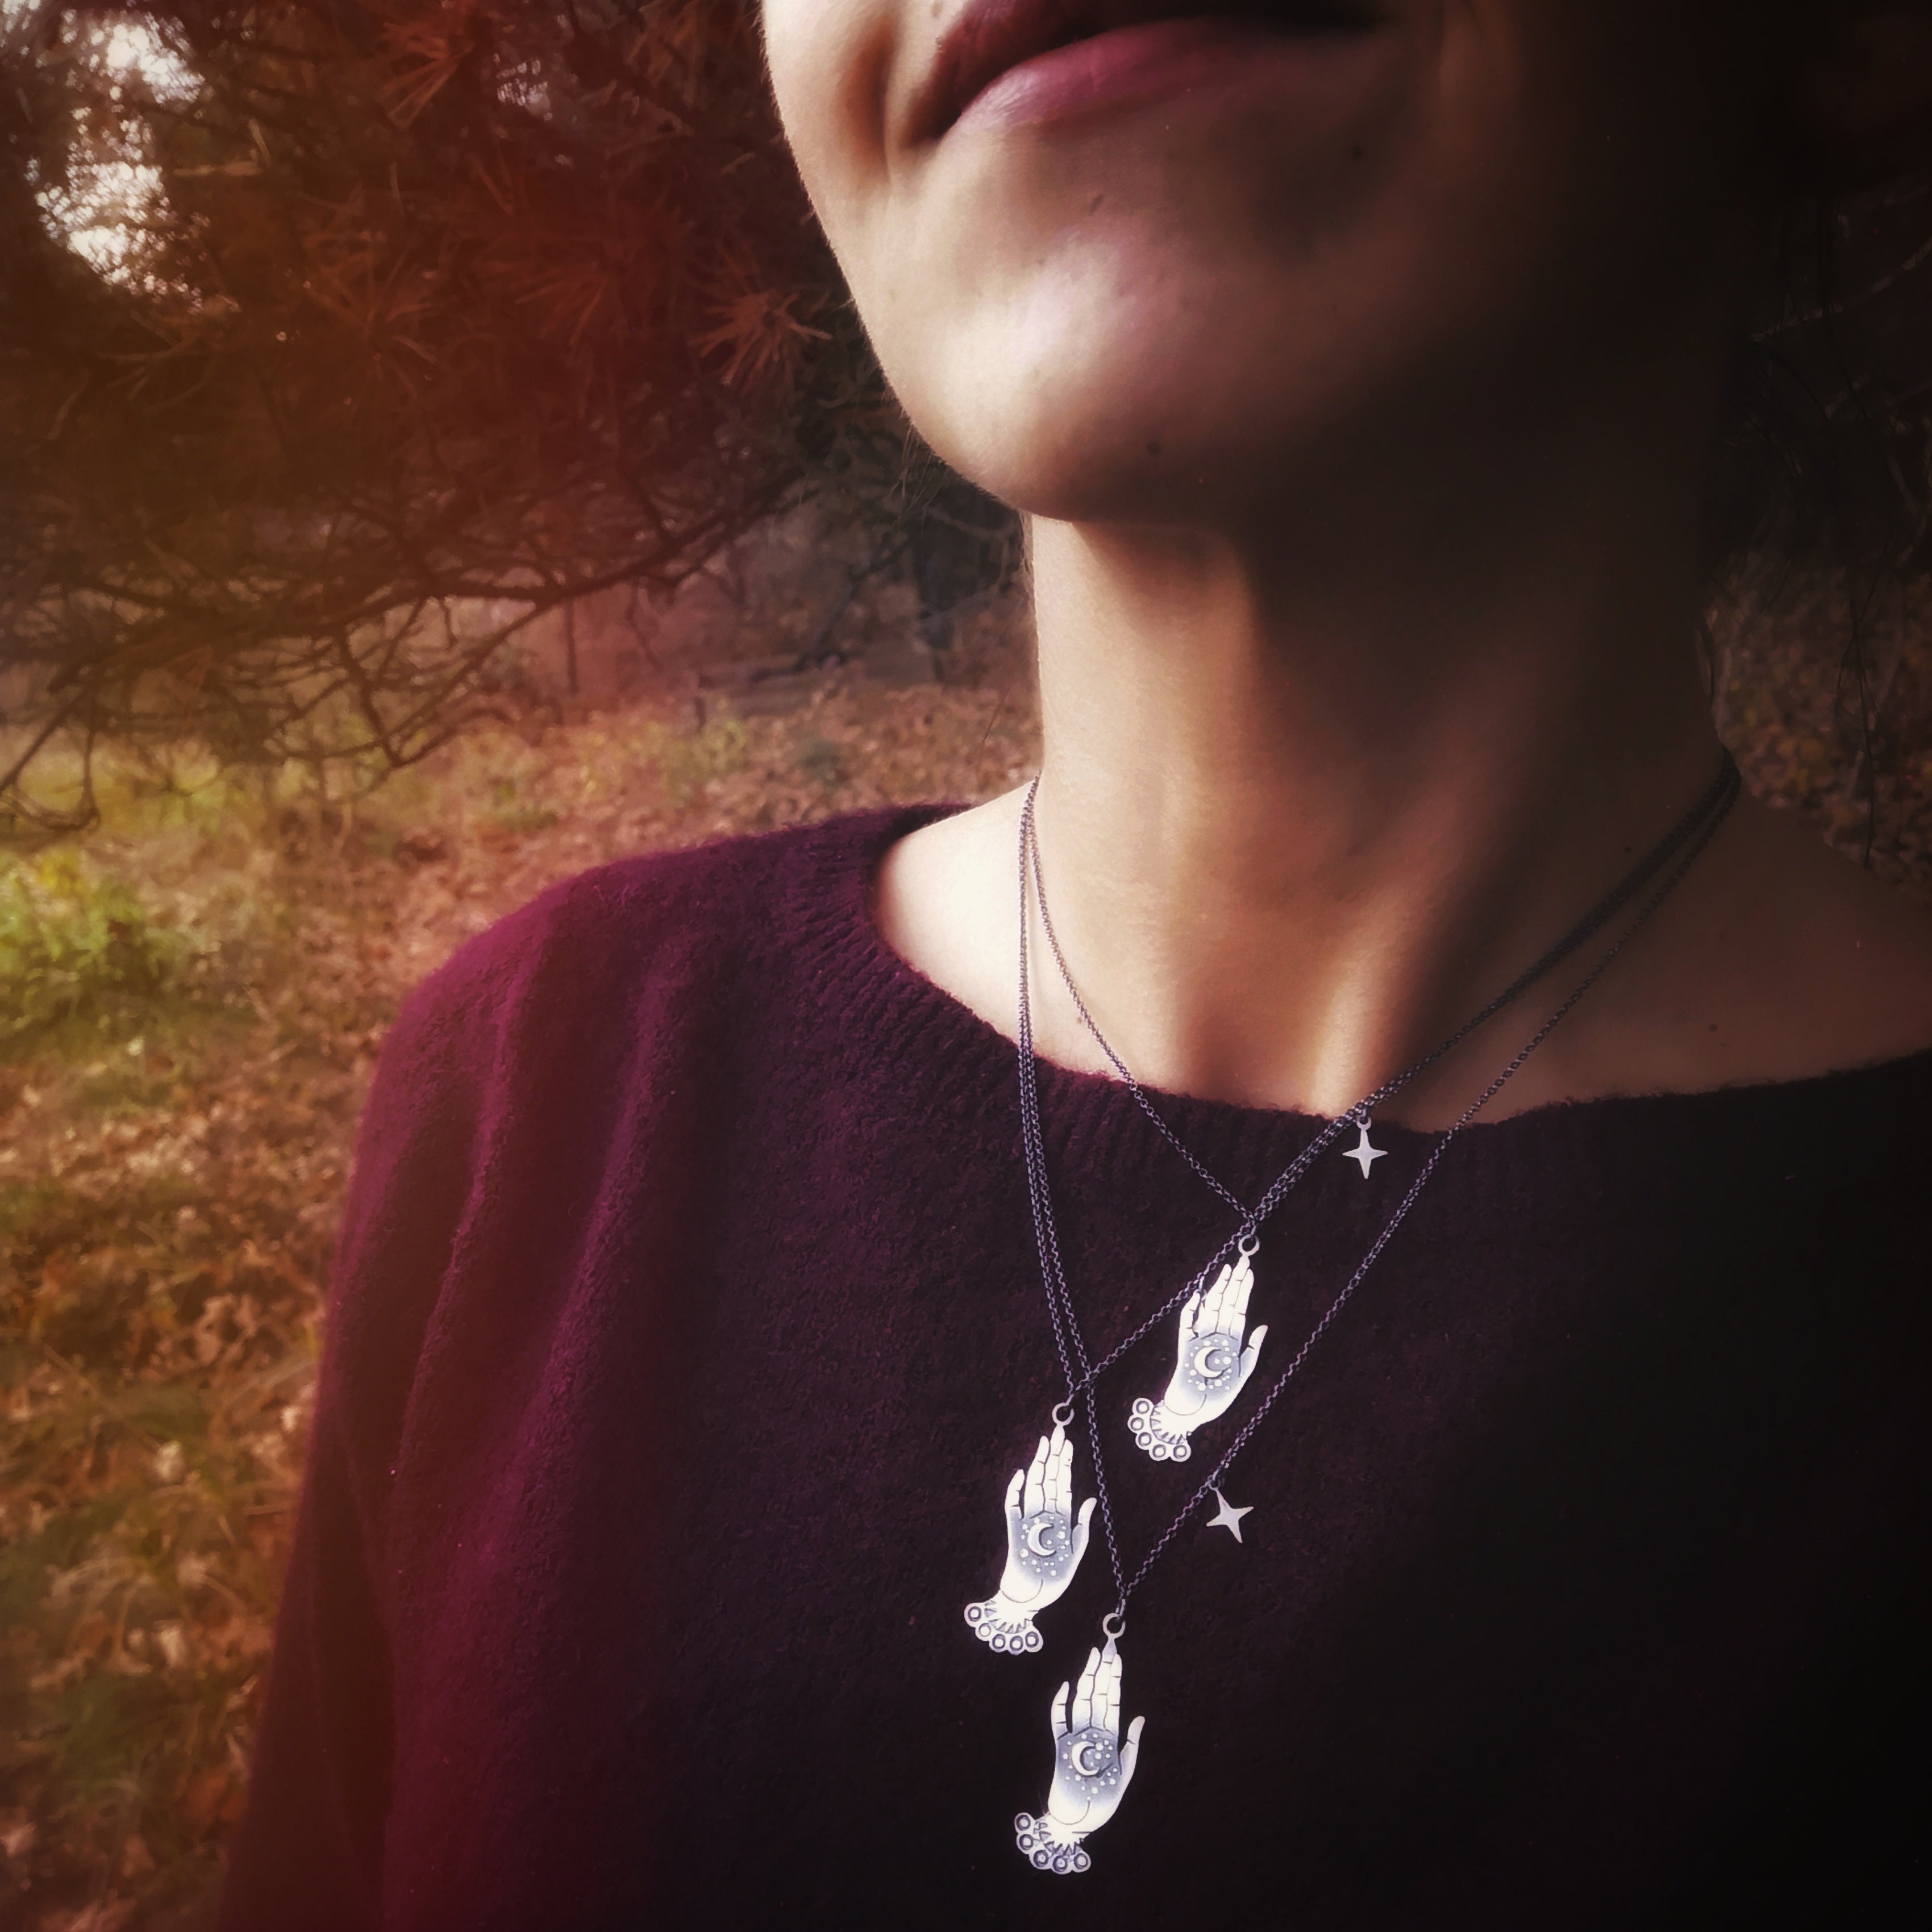 The Moon Goddess Necklace